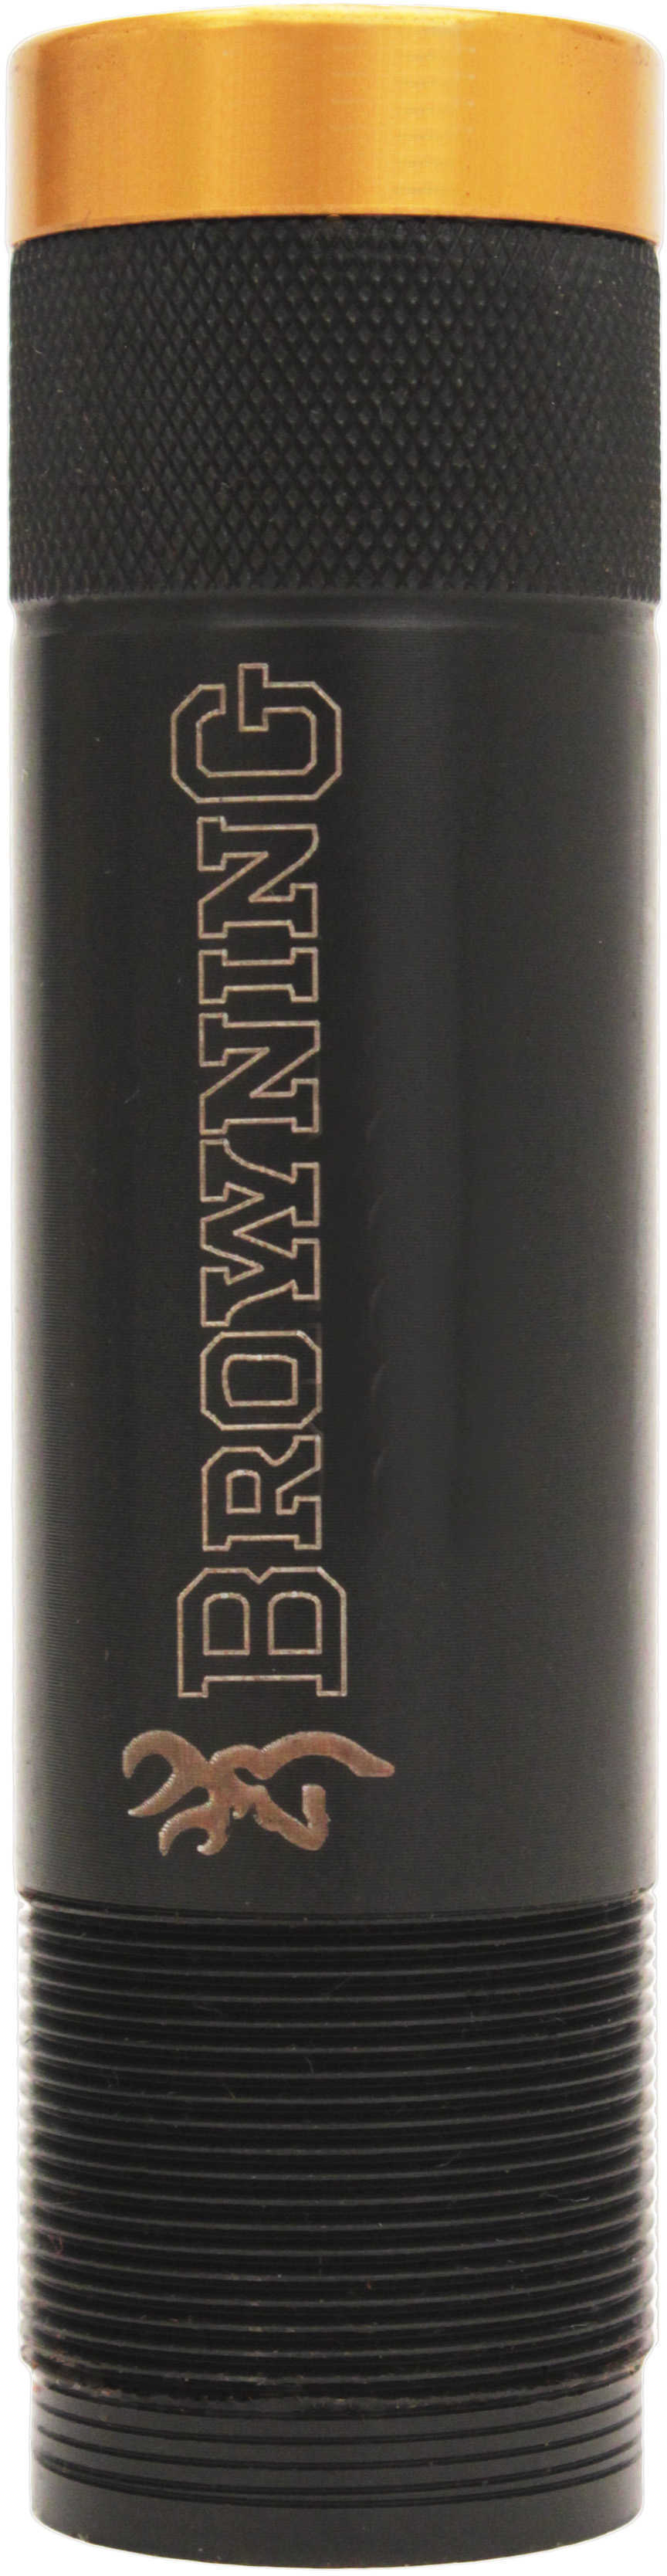 Browning Midas Grade Extended Choke Tube, 12 Gauge Improved Modified 1130163